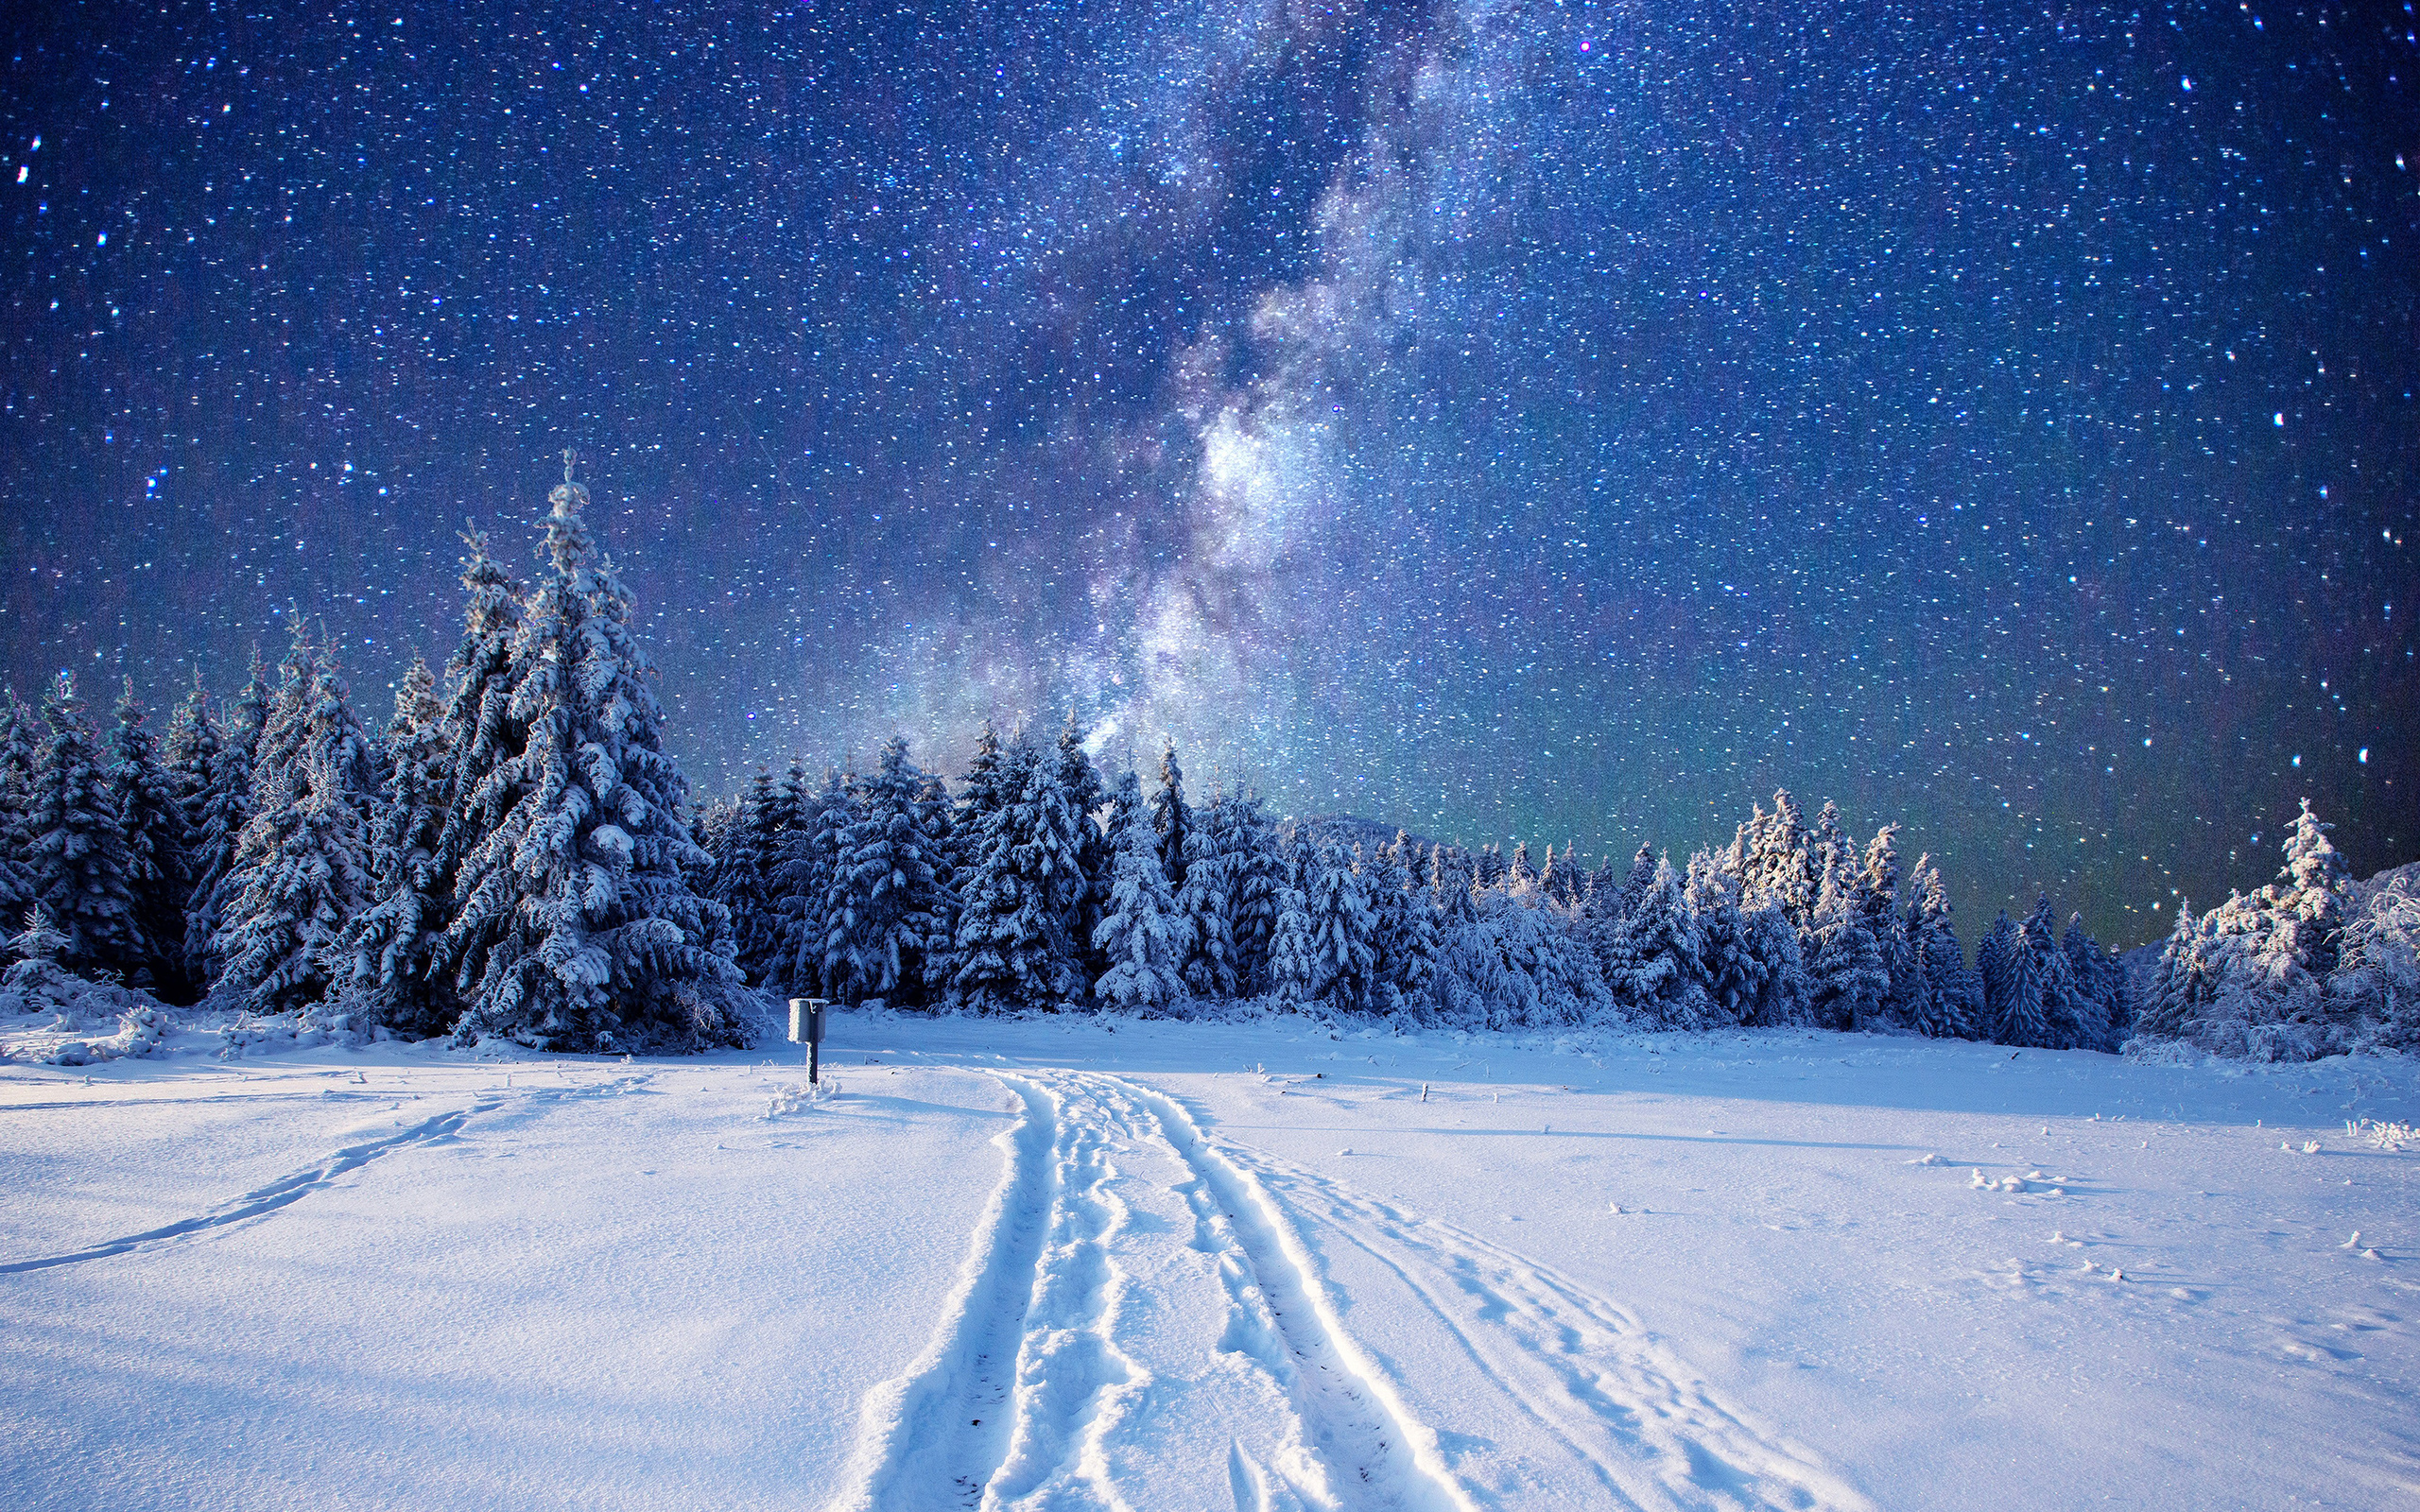 , , , , , , , , , , the sky, traces, road, ate, night, snow, nature, forest, winter, stars